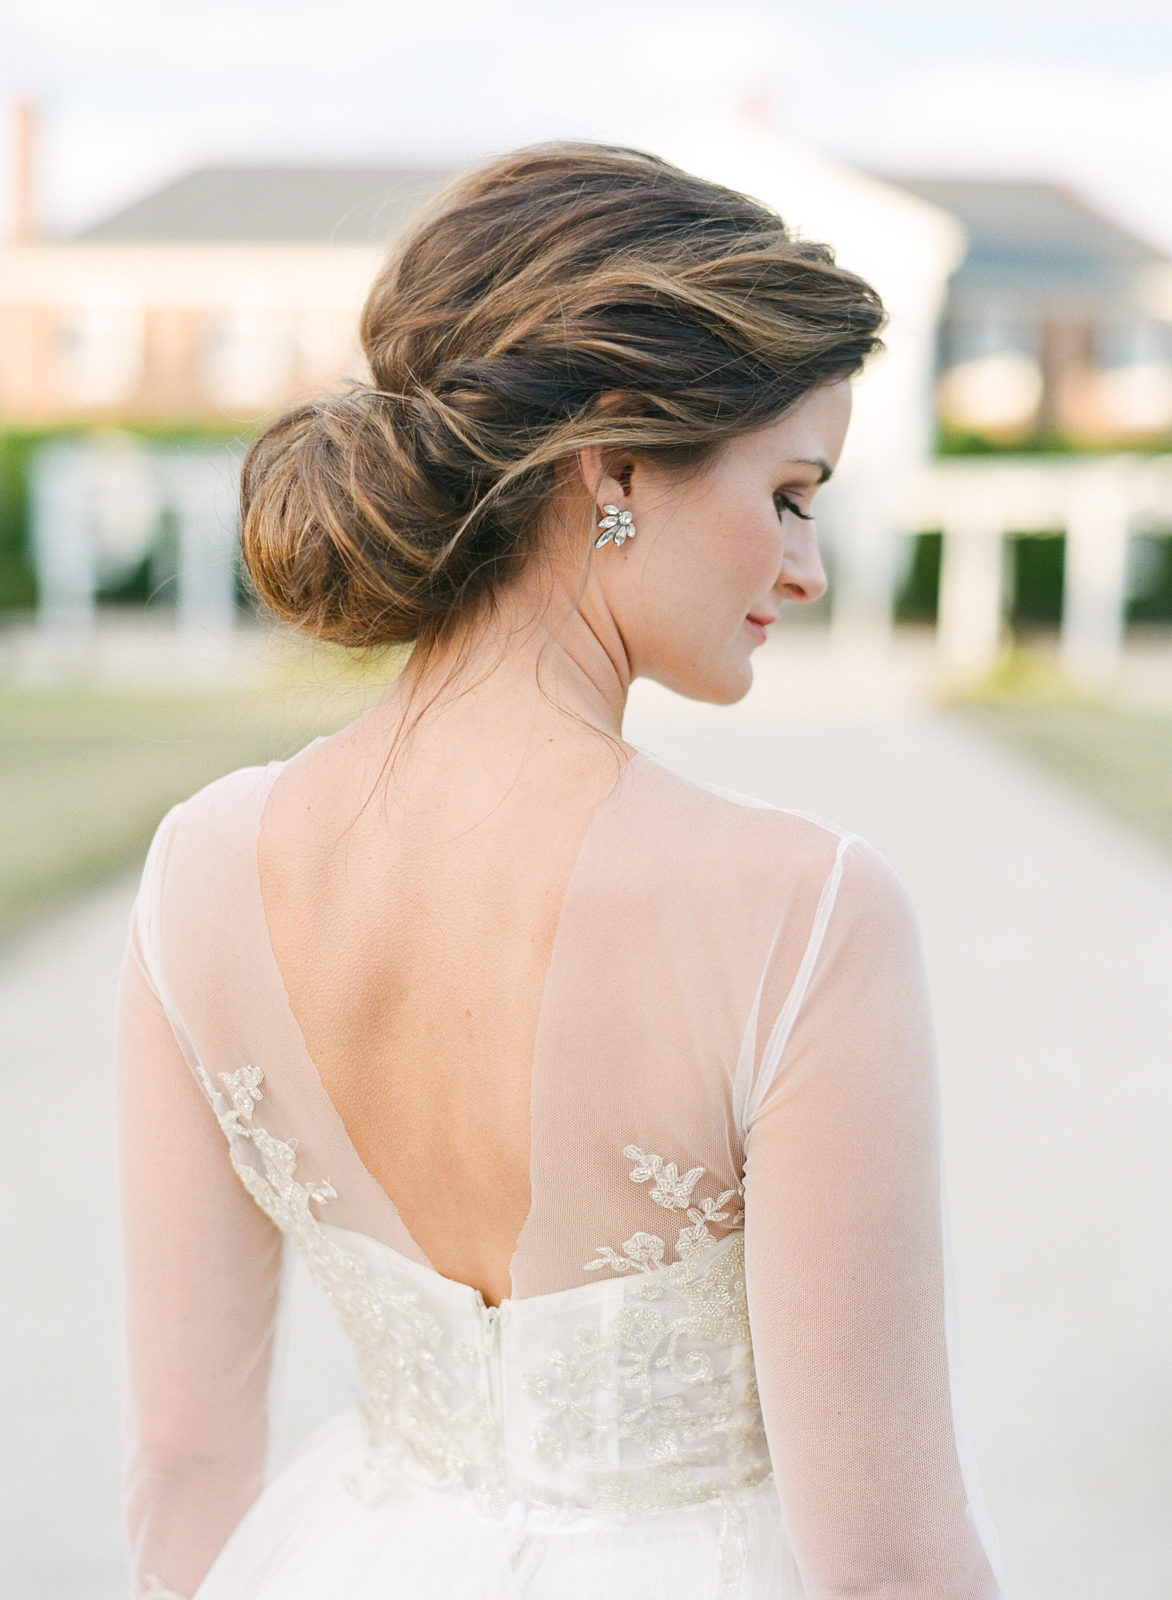 Romantic Bridal Hairstyles for the Fine Art Bride | Molly Carr Photography